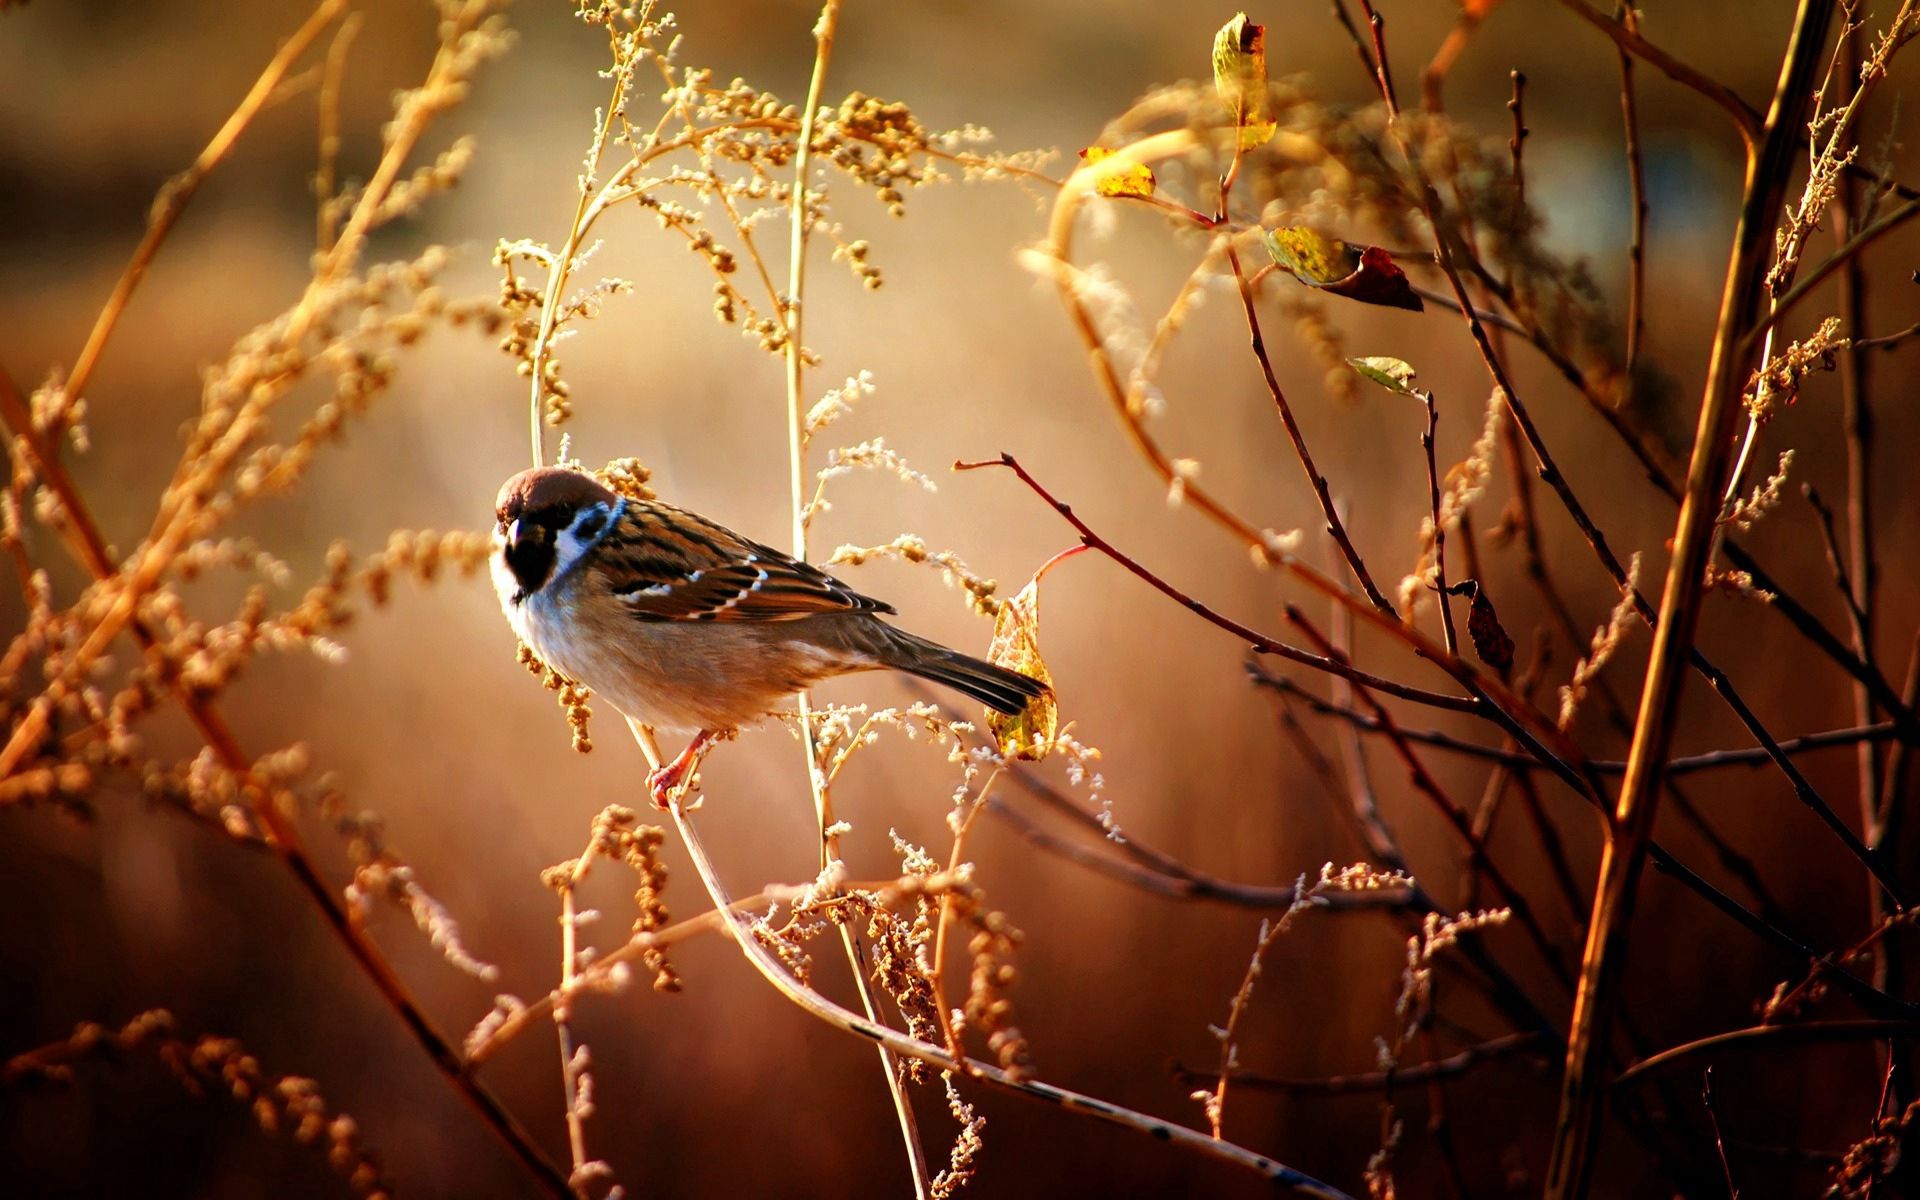 New Lock Screen Wallpapers bird, animals, flowers, wood, tree, sparrow, branches